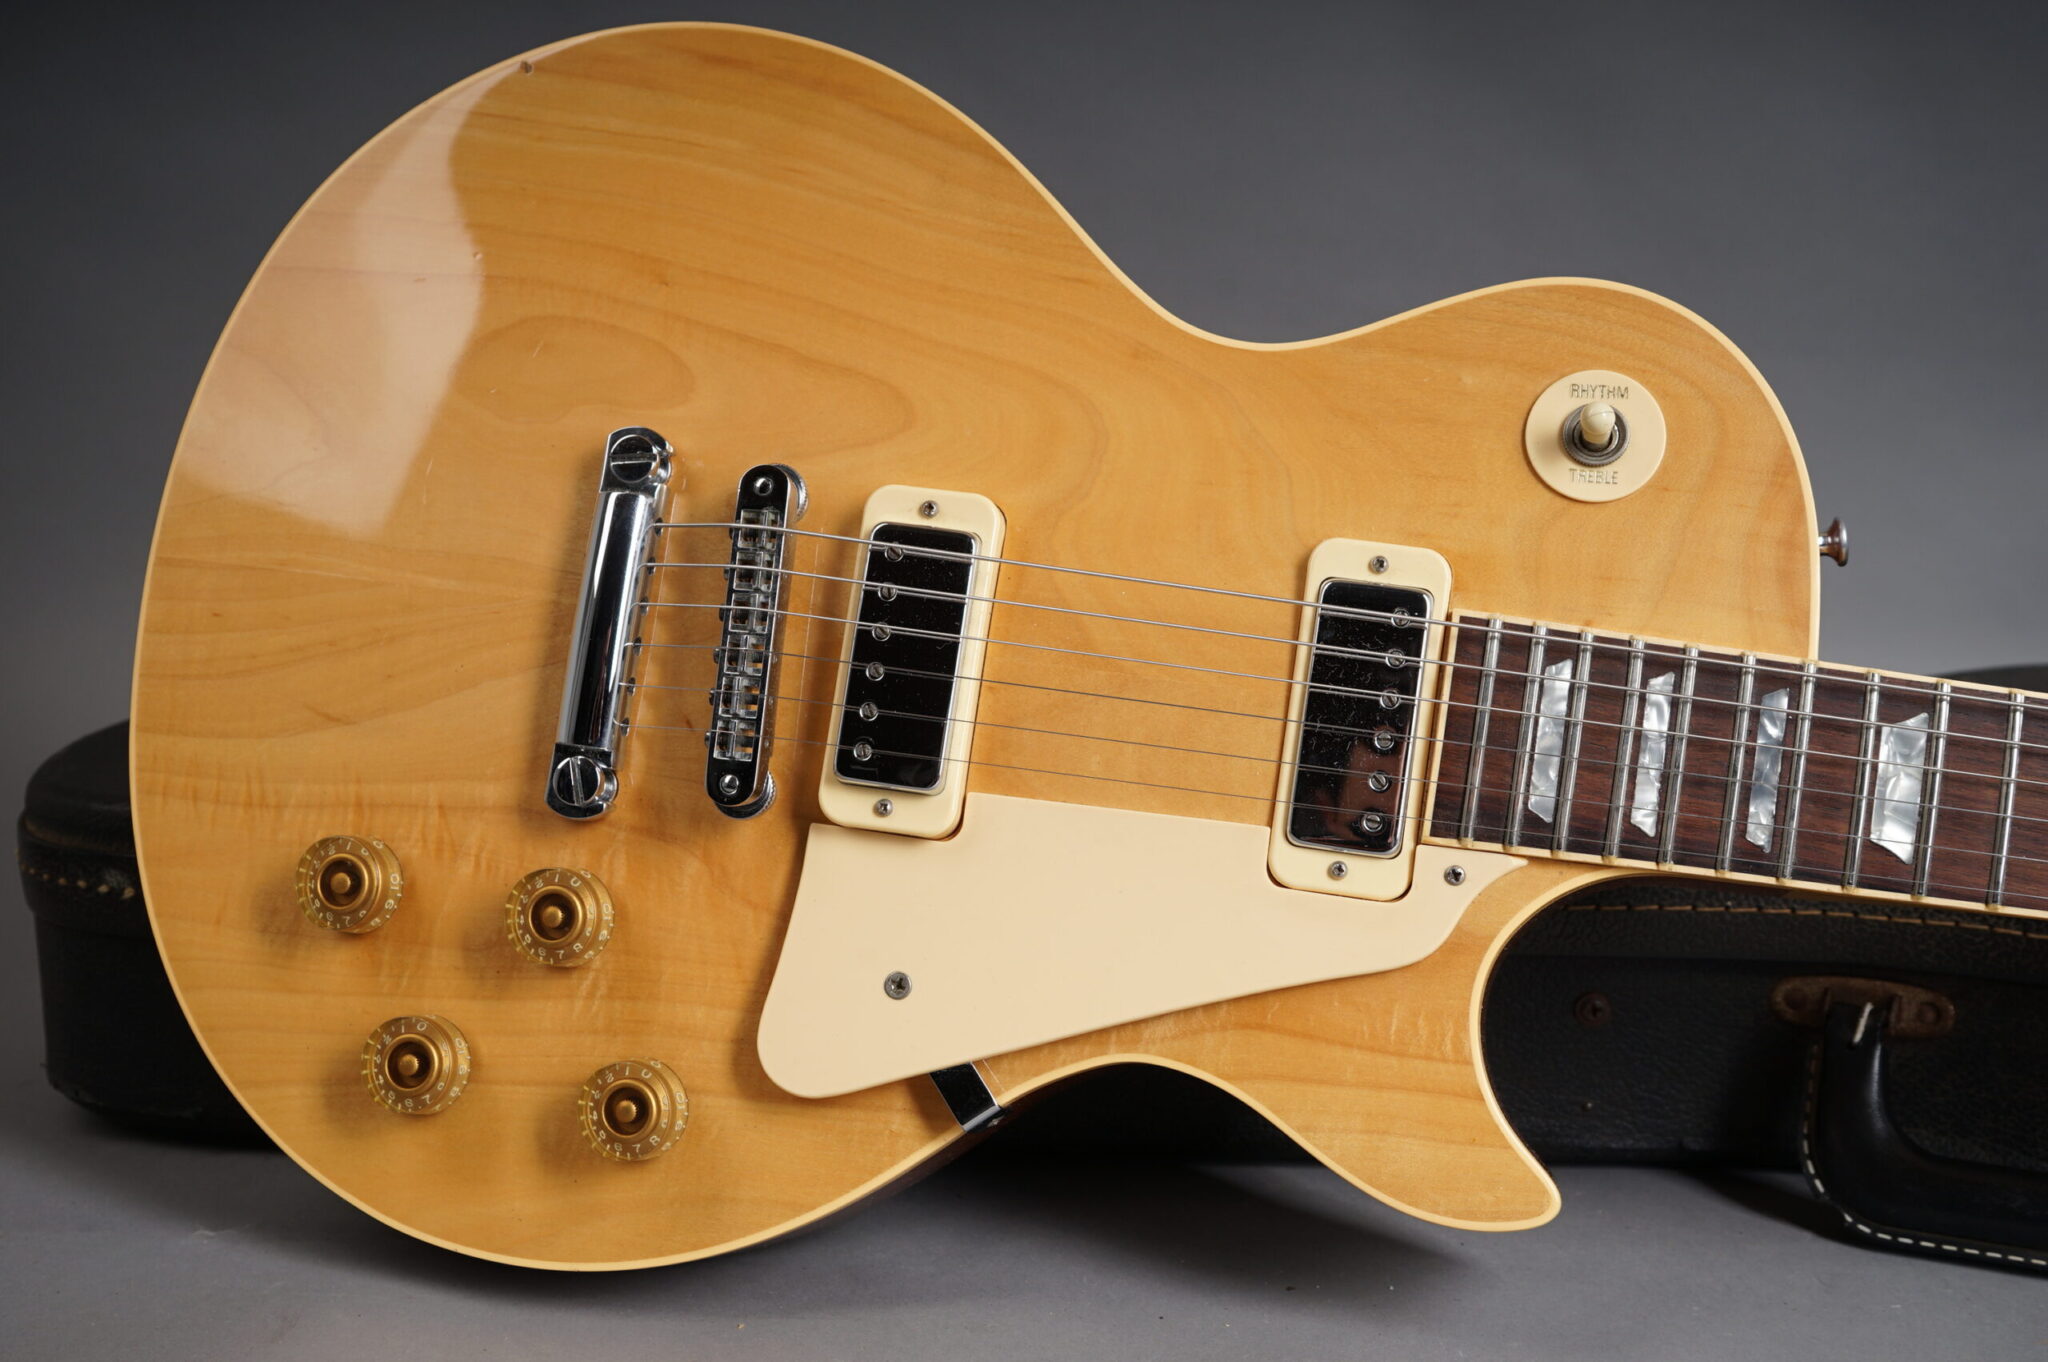 https://guitarpoint.de/app/uploads/products/1980-gibson-les-paul-deluxe-natural/1980-Gibson-Les-Paul-Deluxe-Natural-83460509-7-scaled-2048x1362.jpg